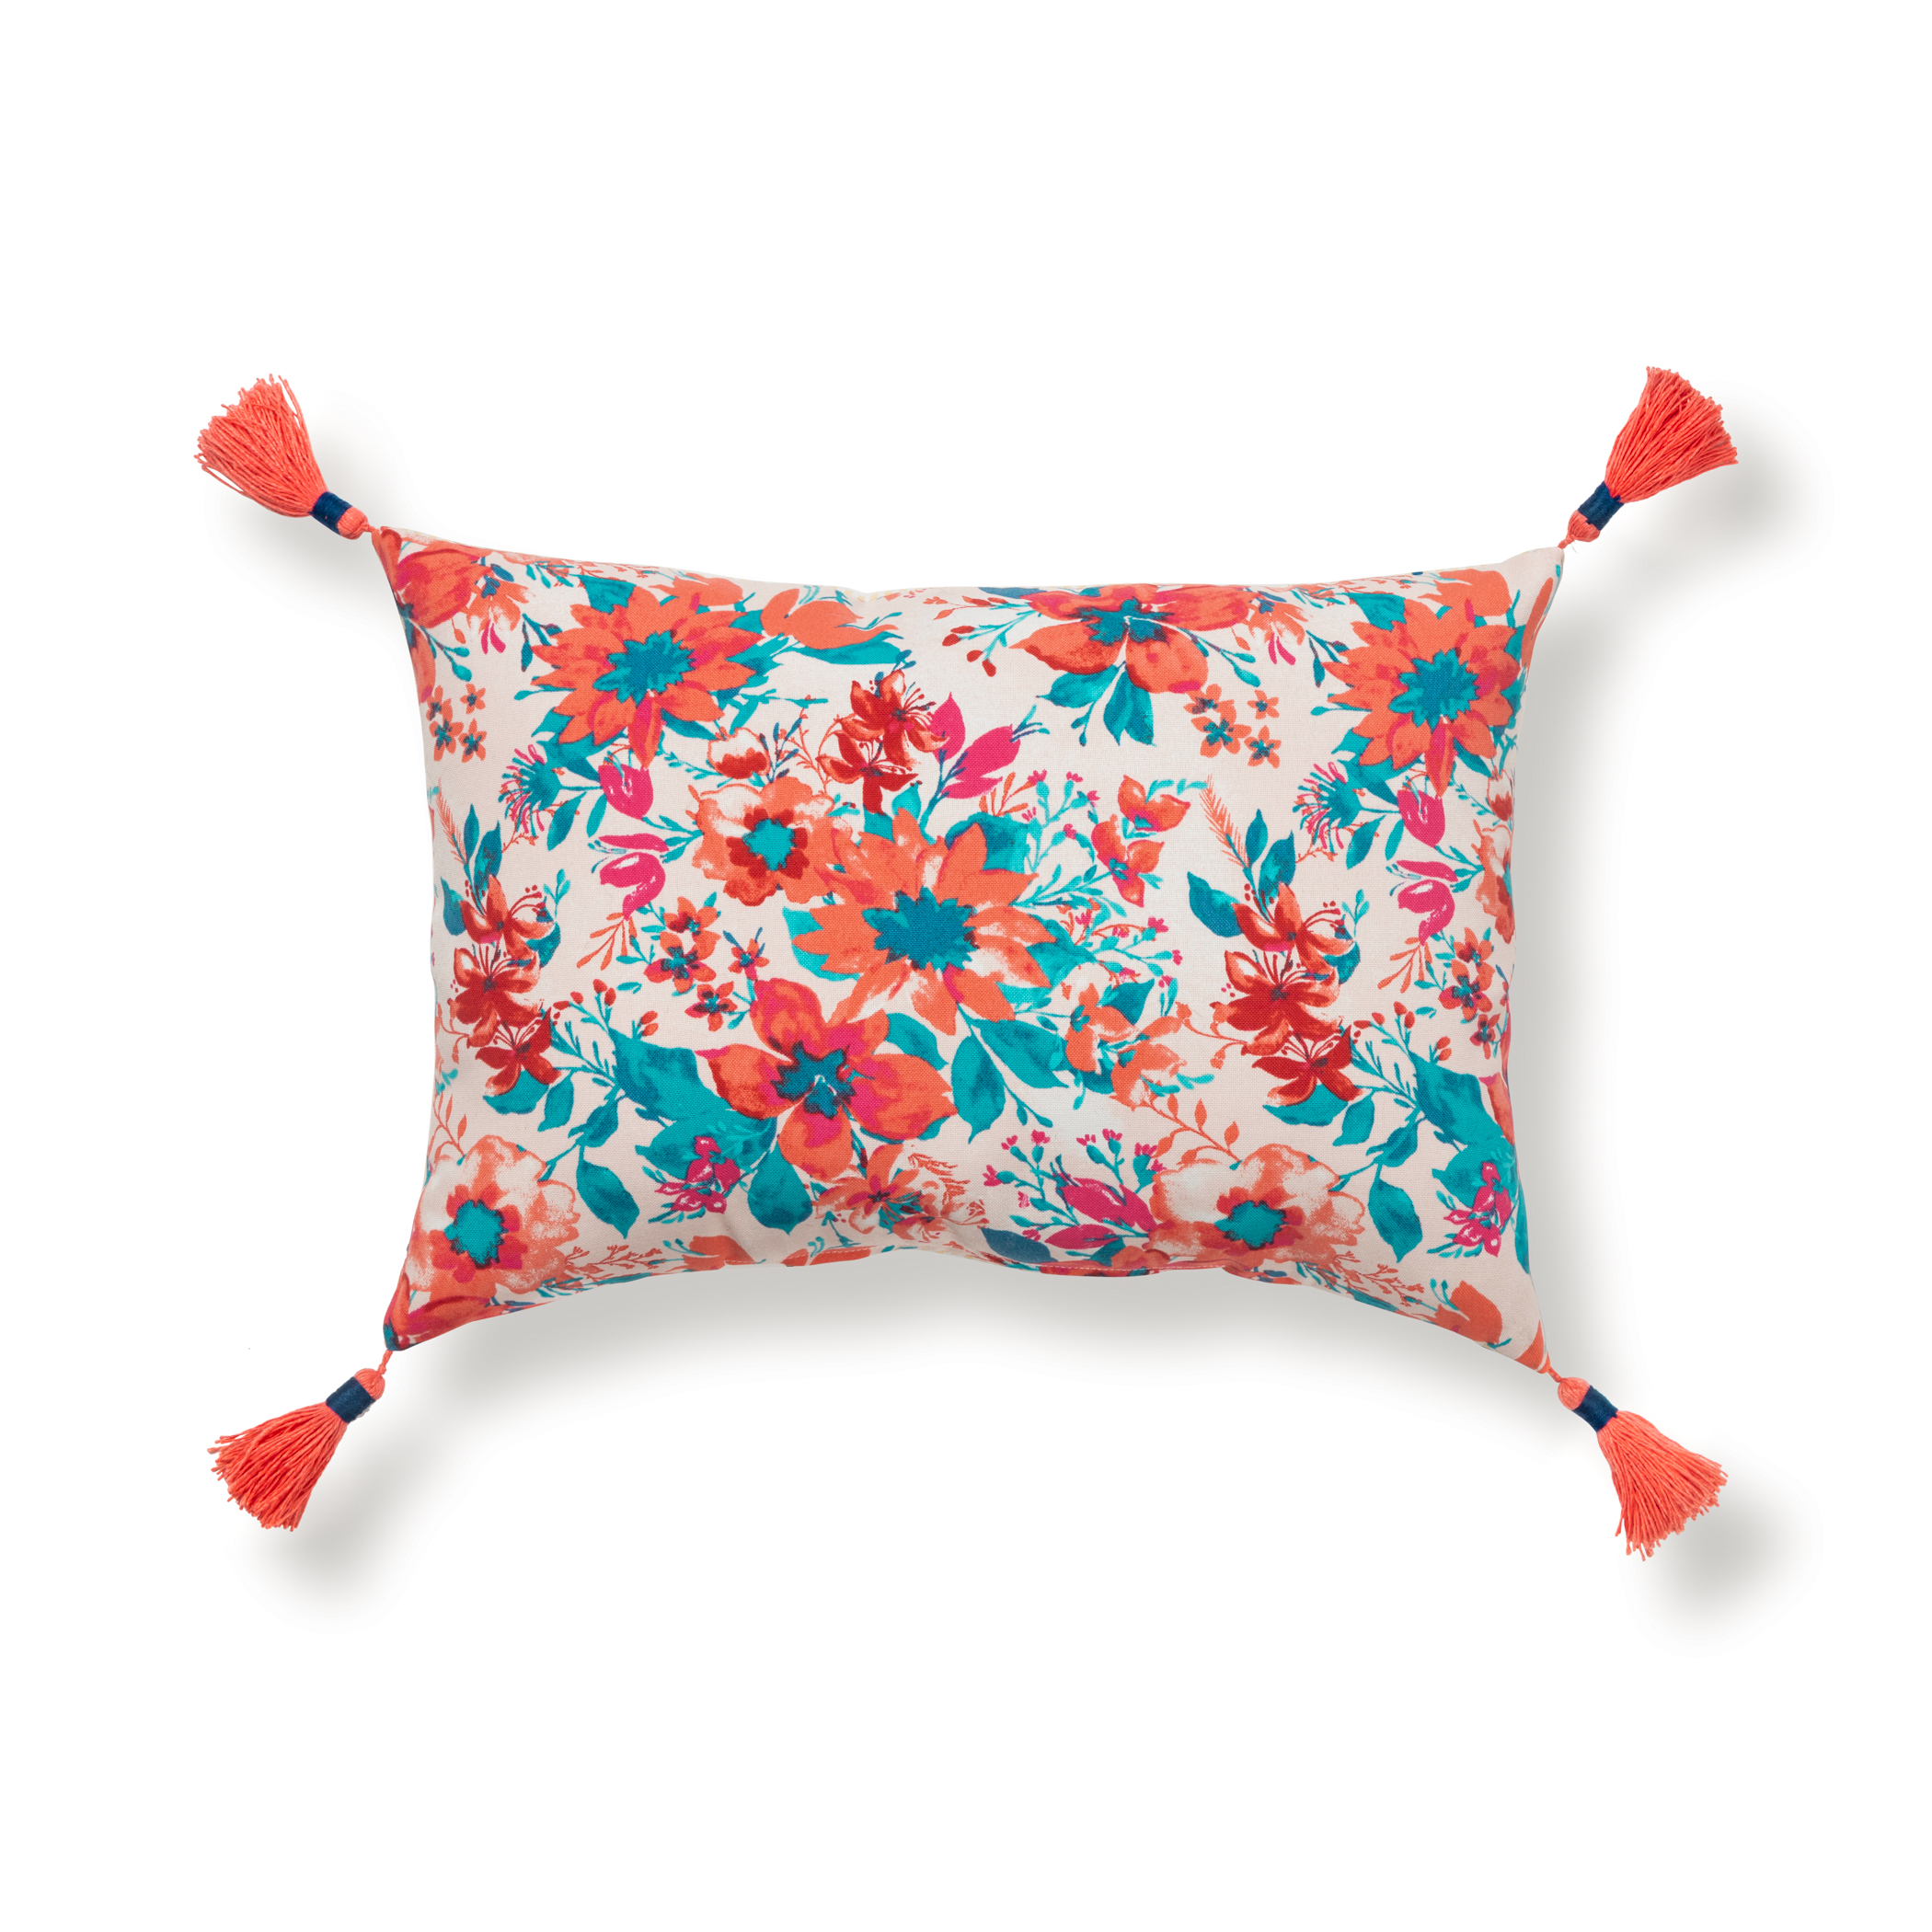 The Pioneer Woman Watering Can Outdoor Rectangle Pillow, Multicolor, 14" x 20" - image 5 of 8